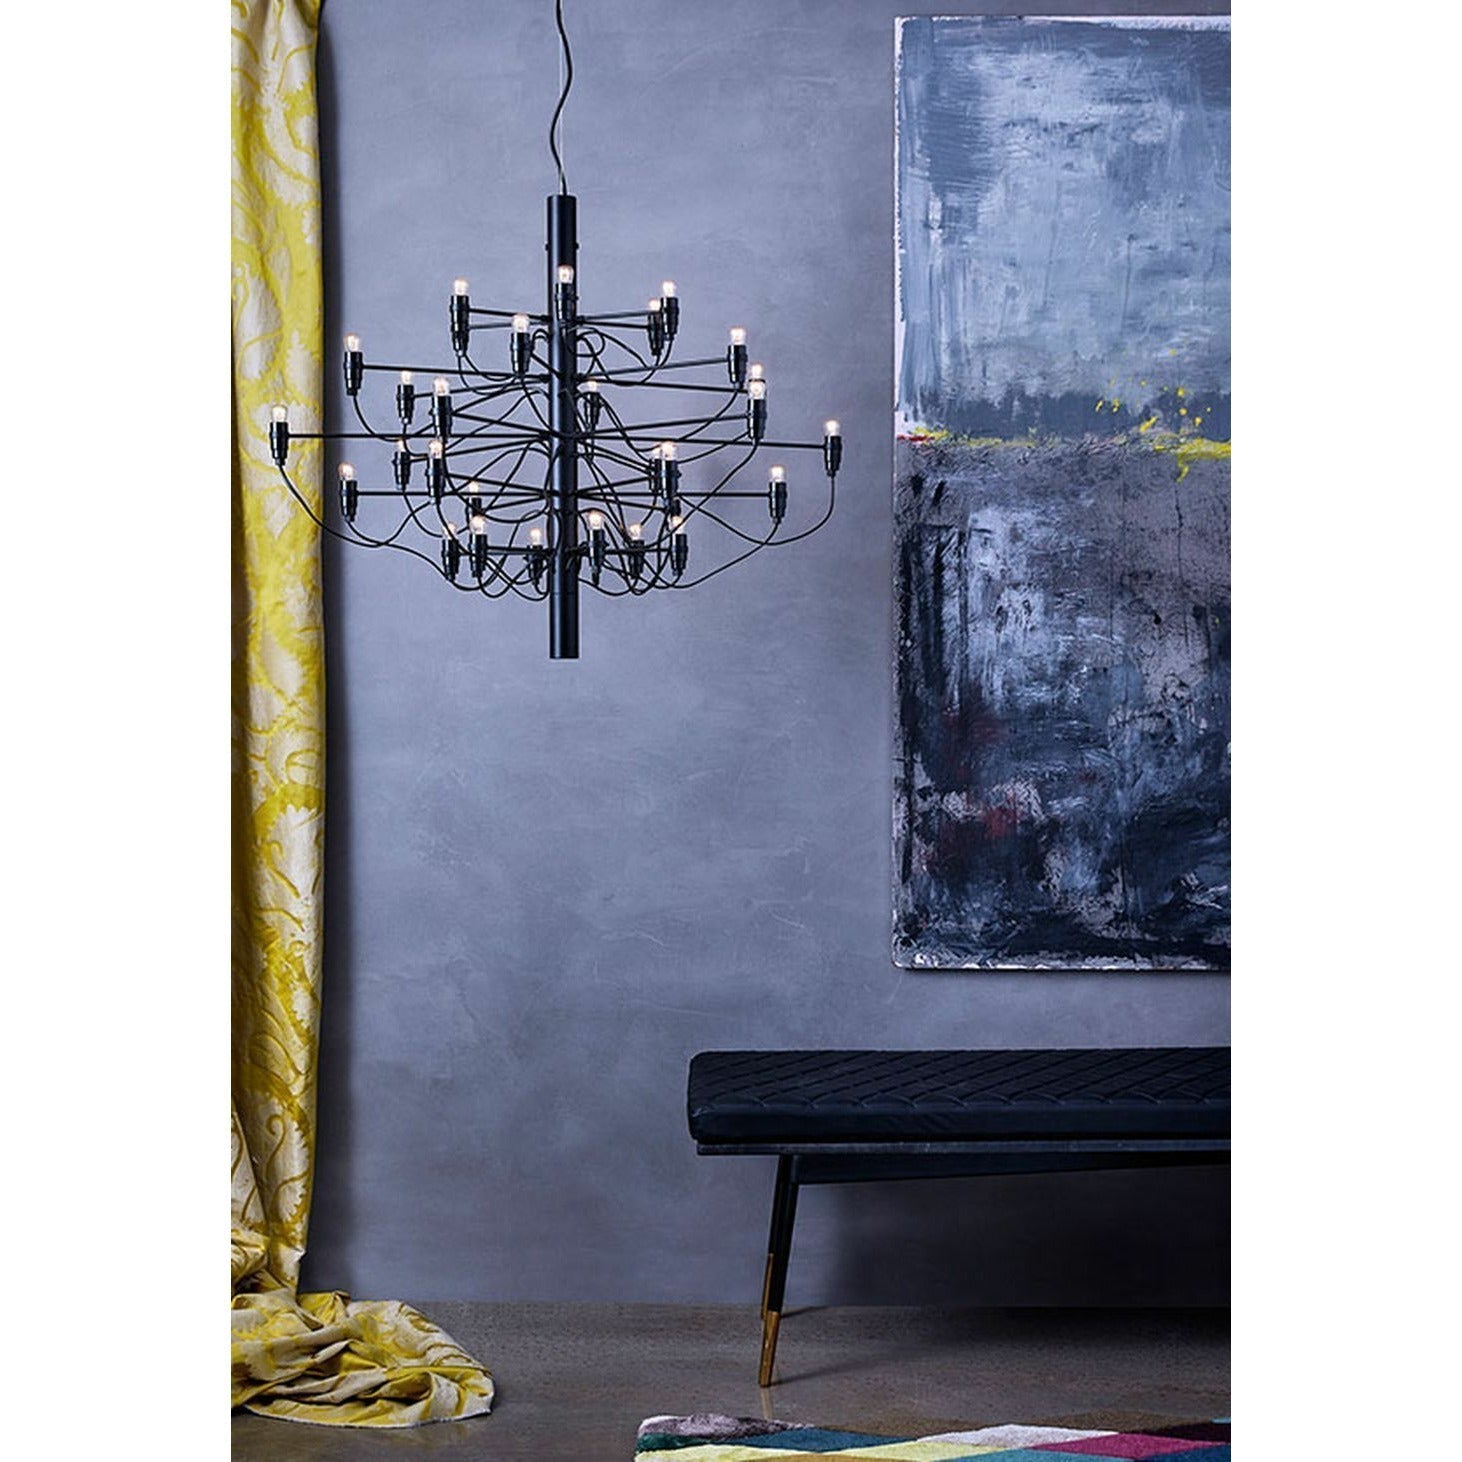 Flos 2097/50 Frosted Chandelier, Chrom